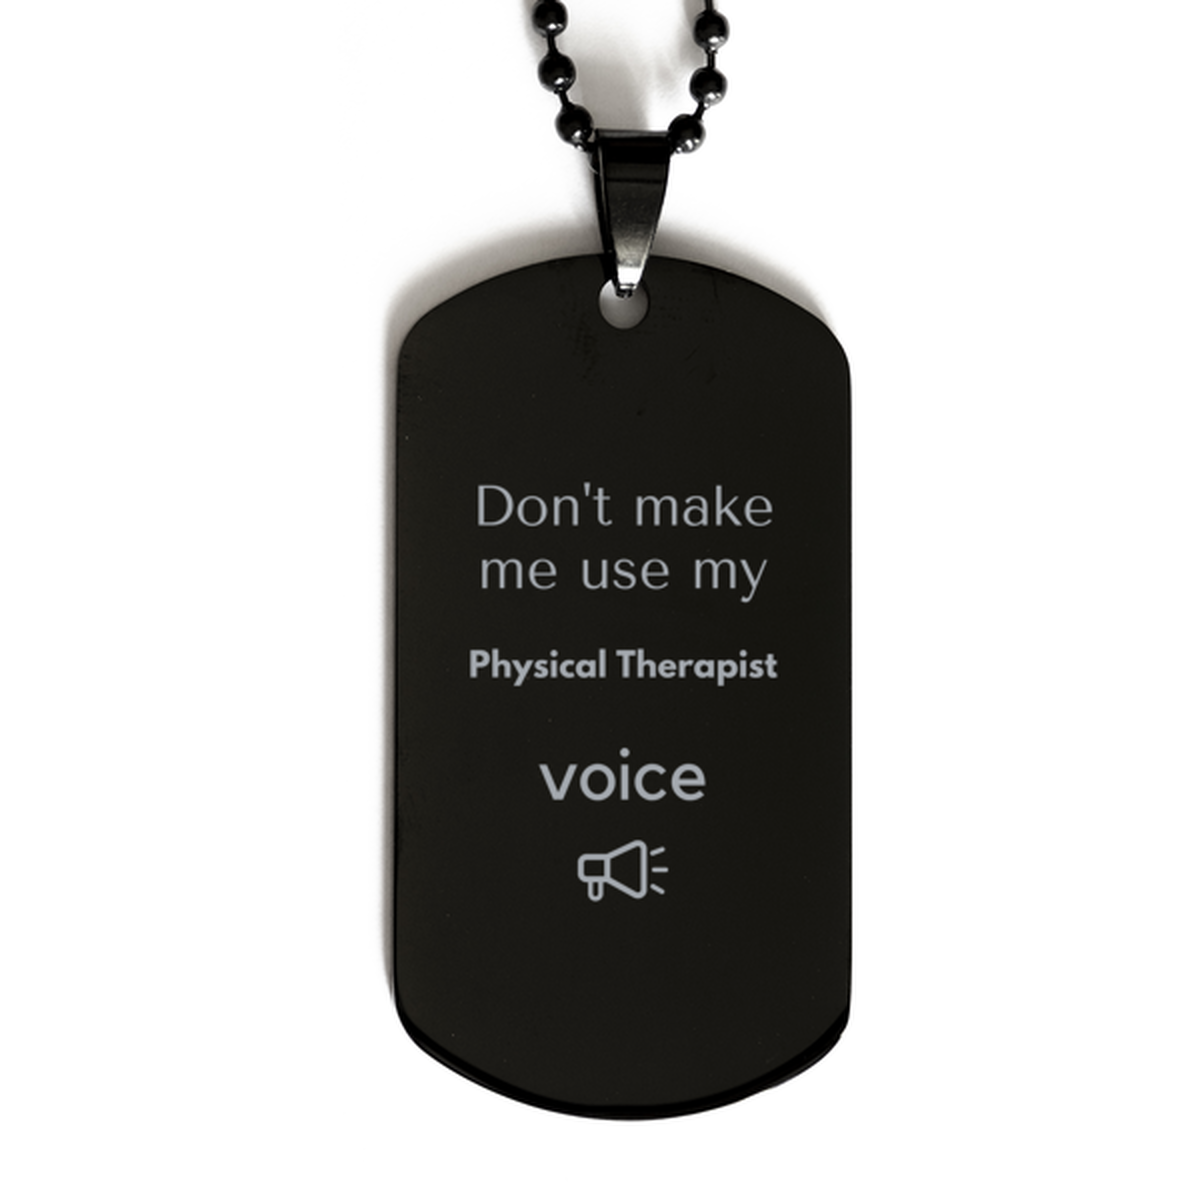 Don't make me use my Physical Therapist voice, Sarcasm Physical Therapist Gifts, Christmas Physical Therapist Black Dog Tag Birthday Unique Gifts For Physical Therapist Coworkers, Men, Women, Colleague, Friends